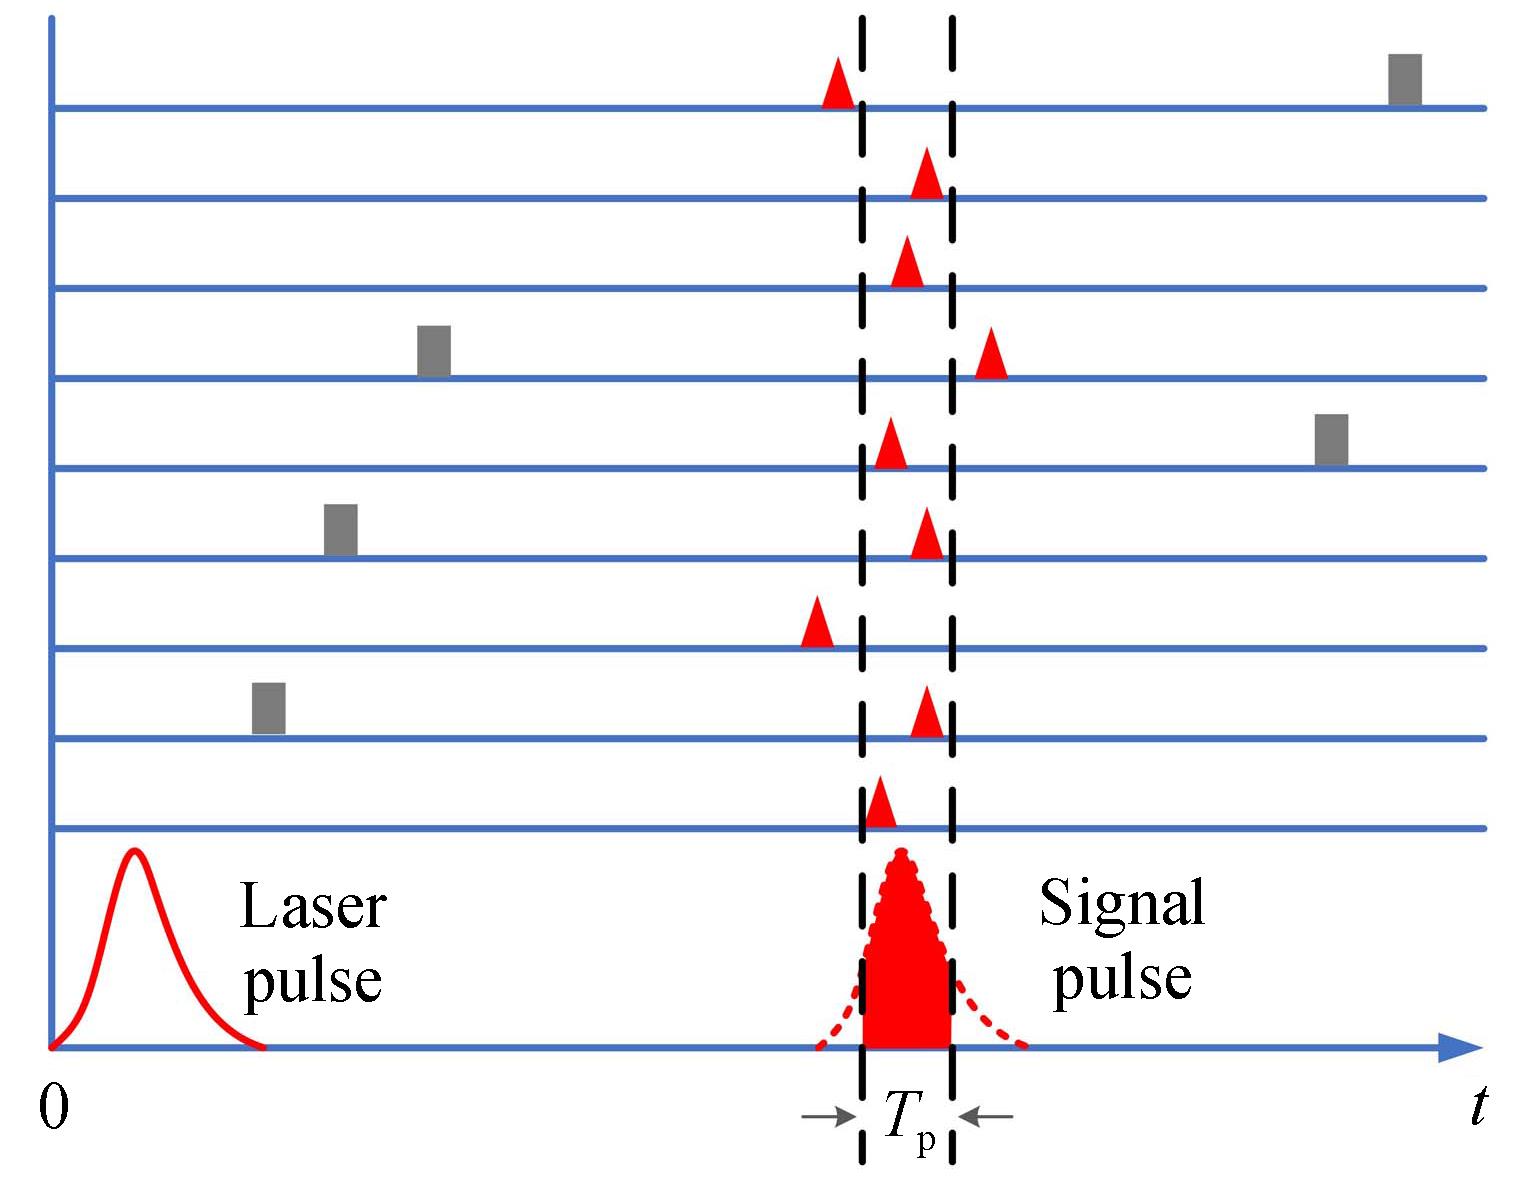 The aggregation effect of photon counting events on the time axis